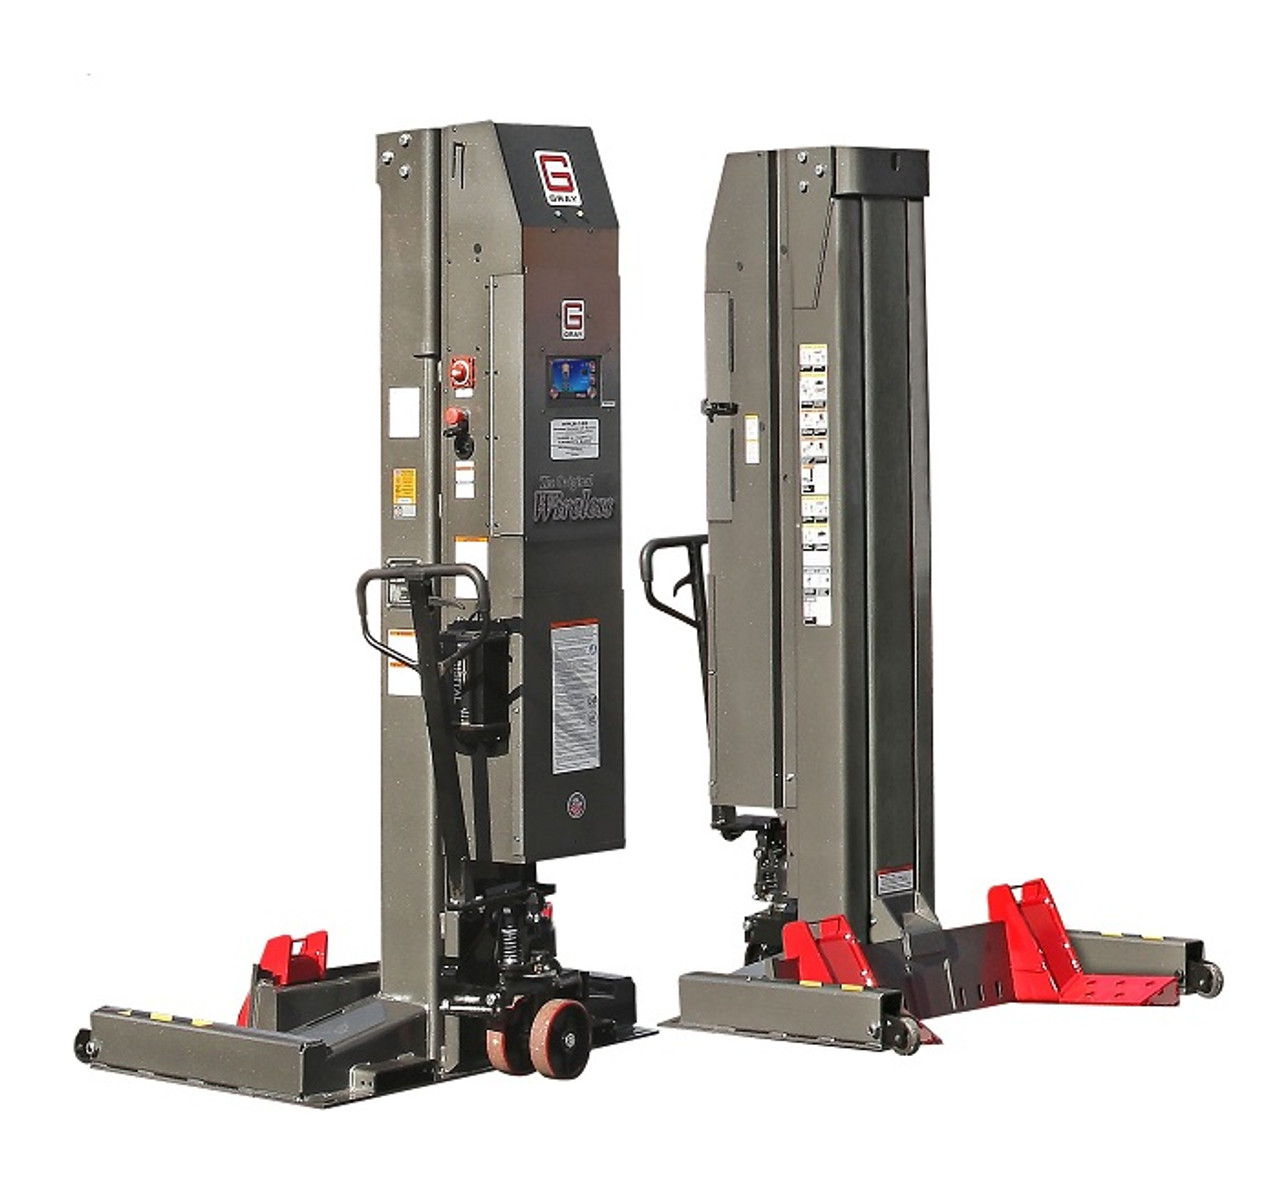 Gray WPLS-140 14,000LB Wireless Portable Lift System (1 post)